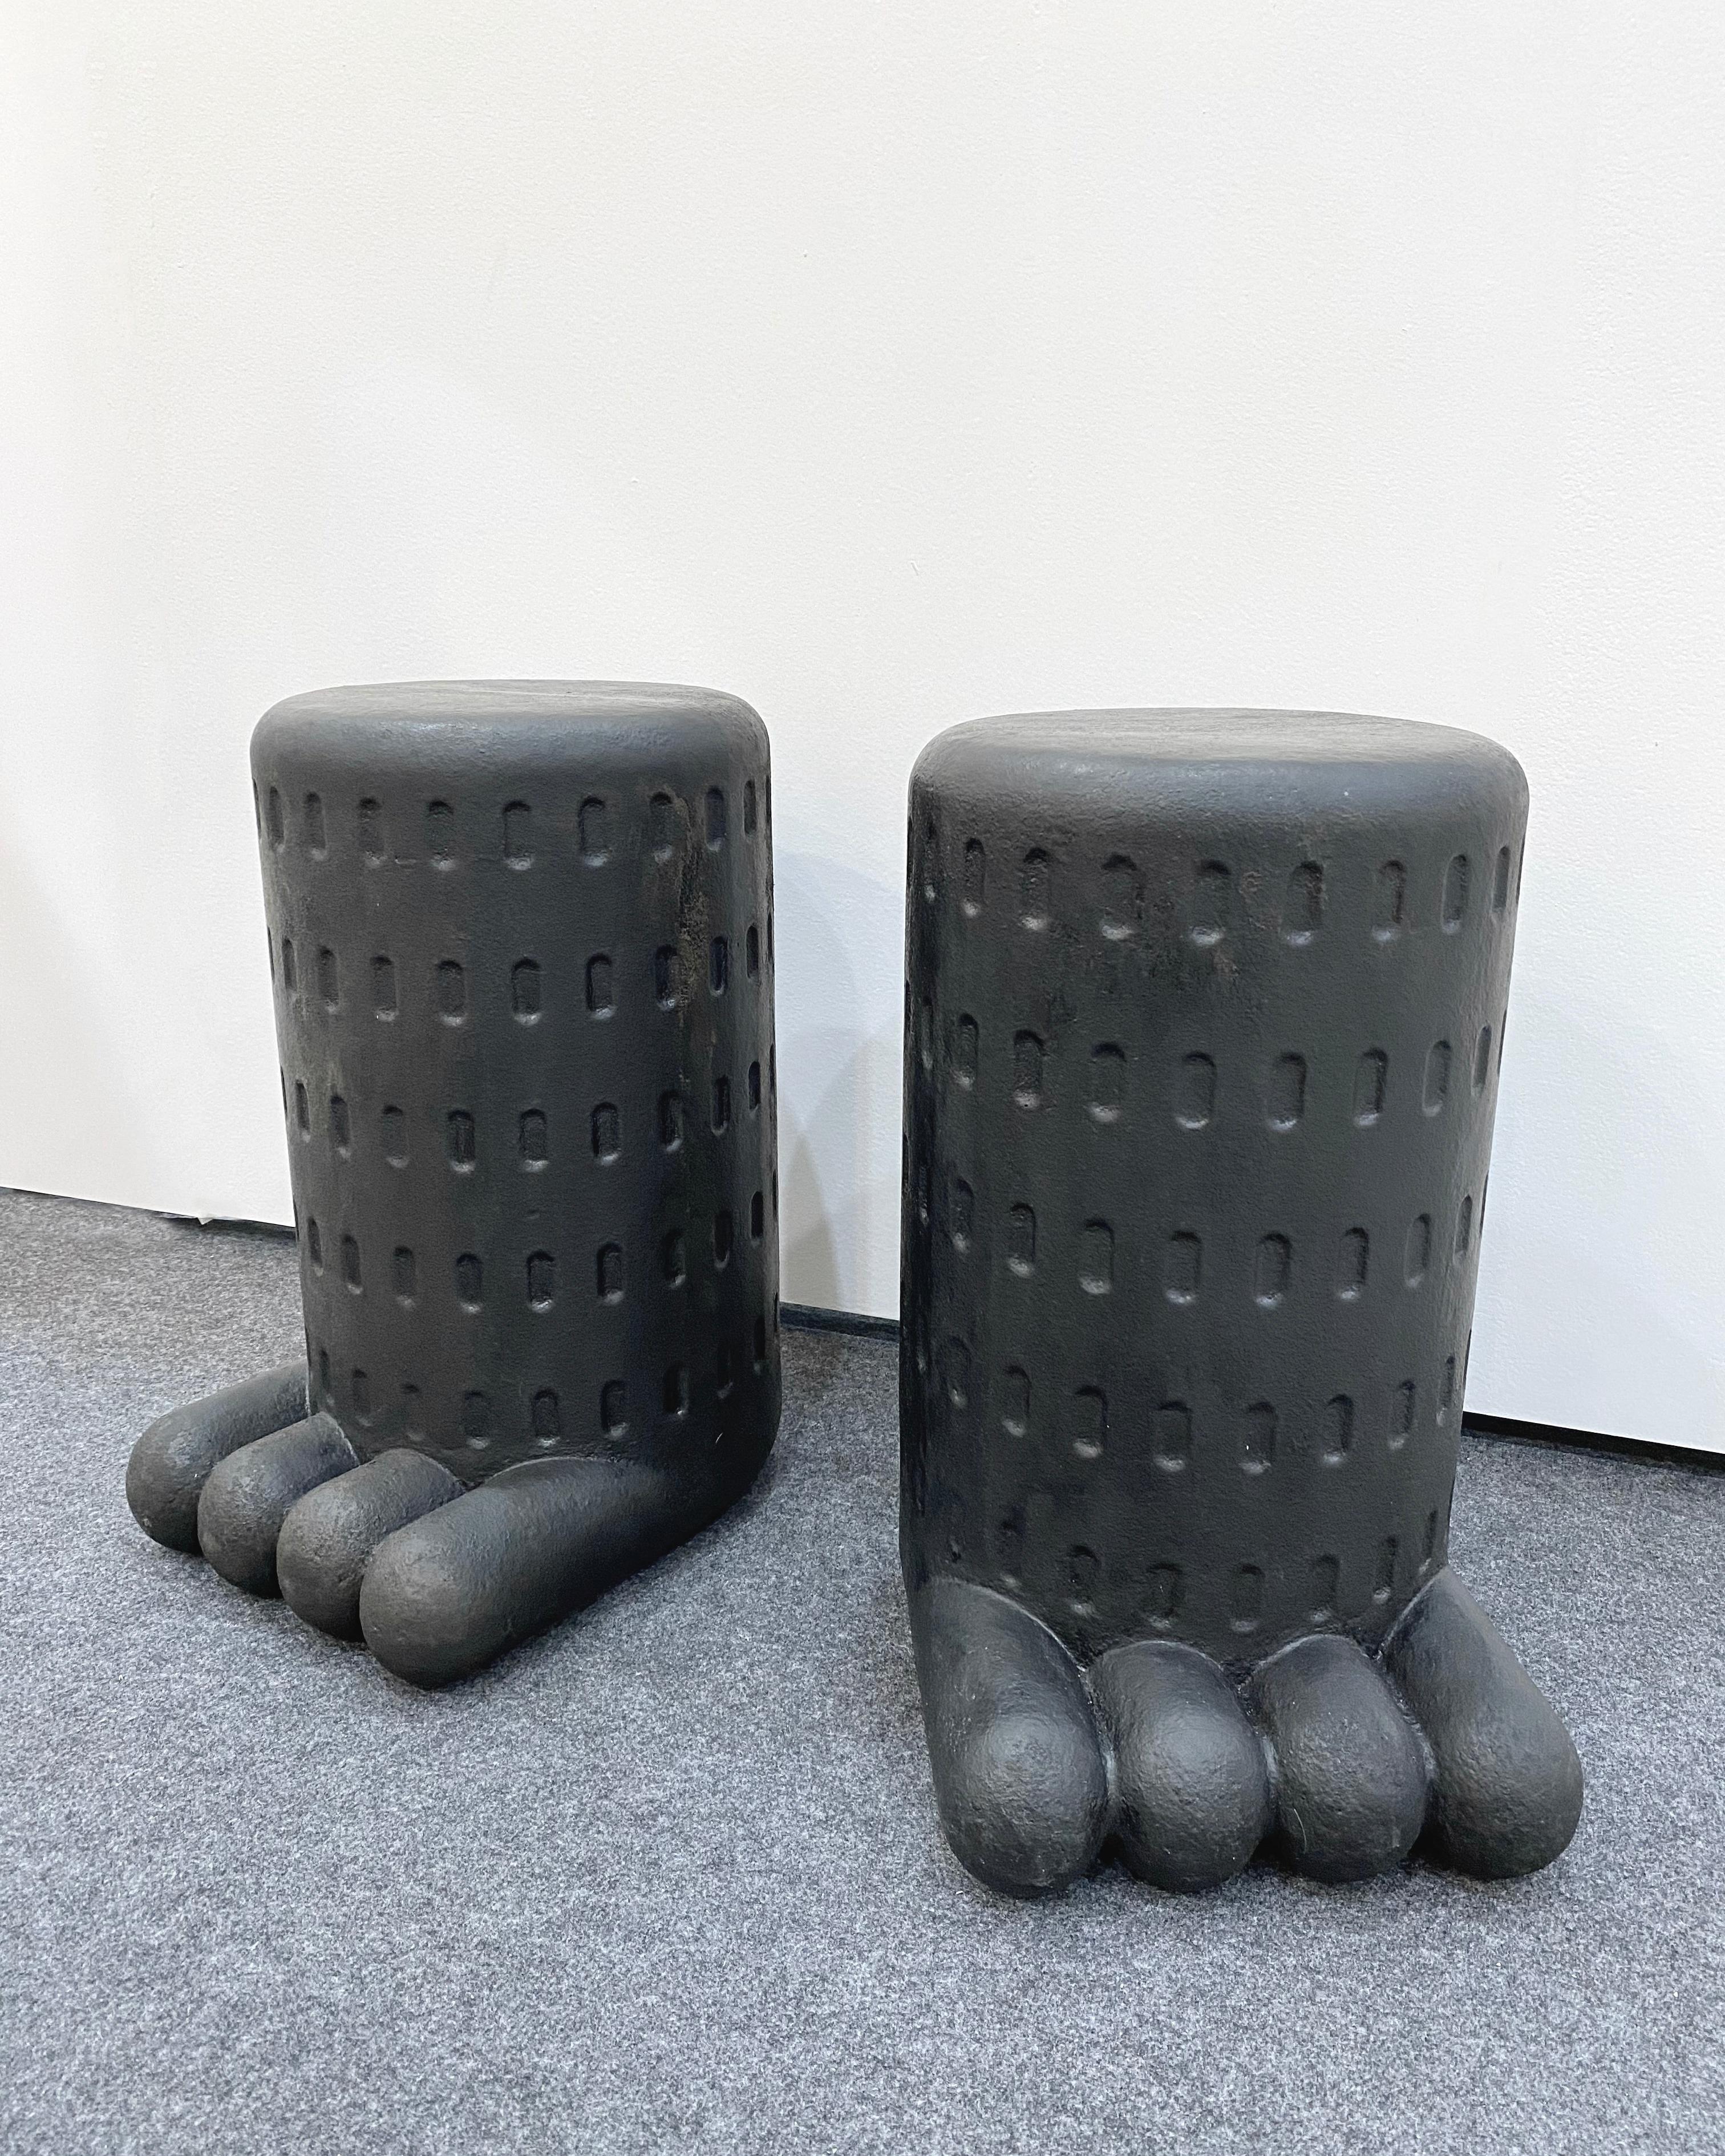 Black Paw stool duo by Hakmin Lee
Materials: FRB
Dimensions: 29 x 37.5 x 50 cm
Also can be made to order in different DIMENSIONS and different COLORS. 

Studio HAK is Seoul based studio led by designer Hakmin Lee, who has an ambition of